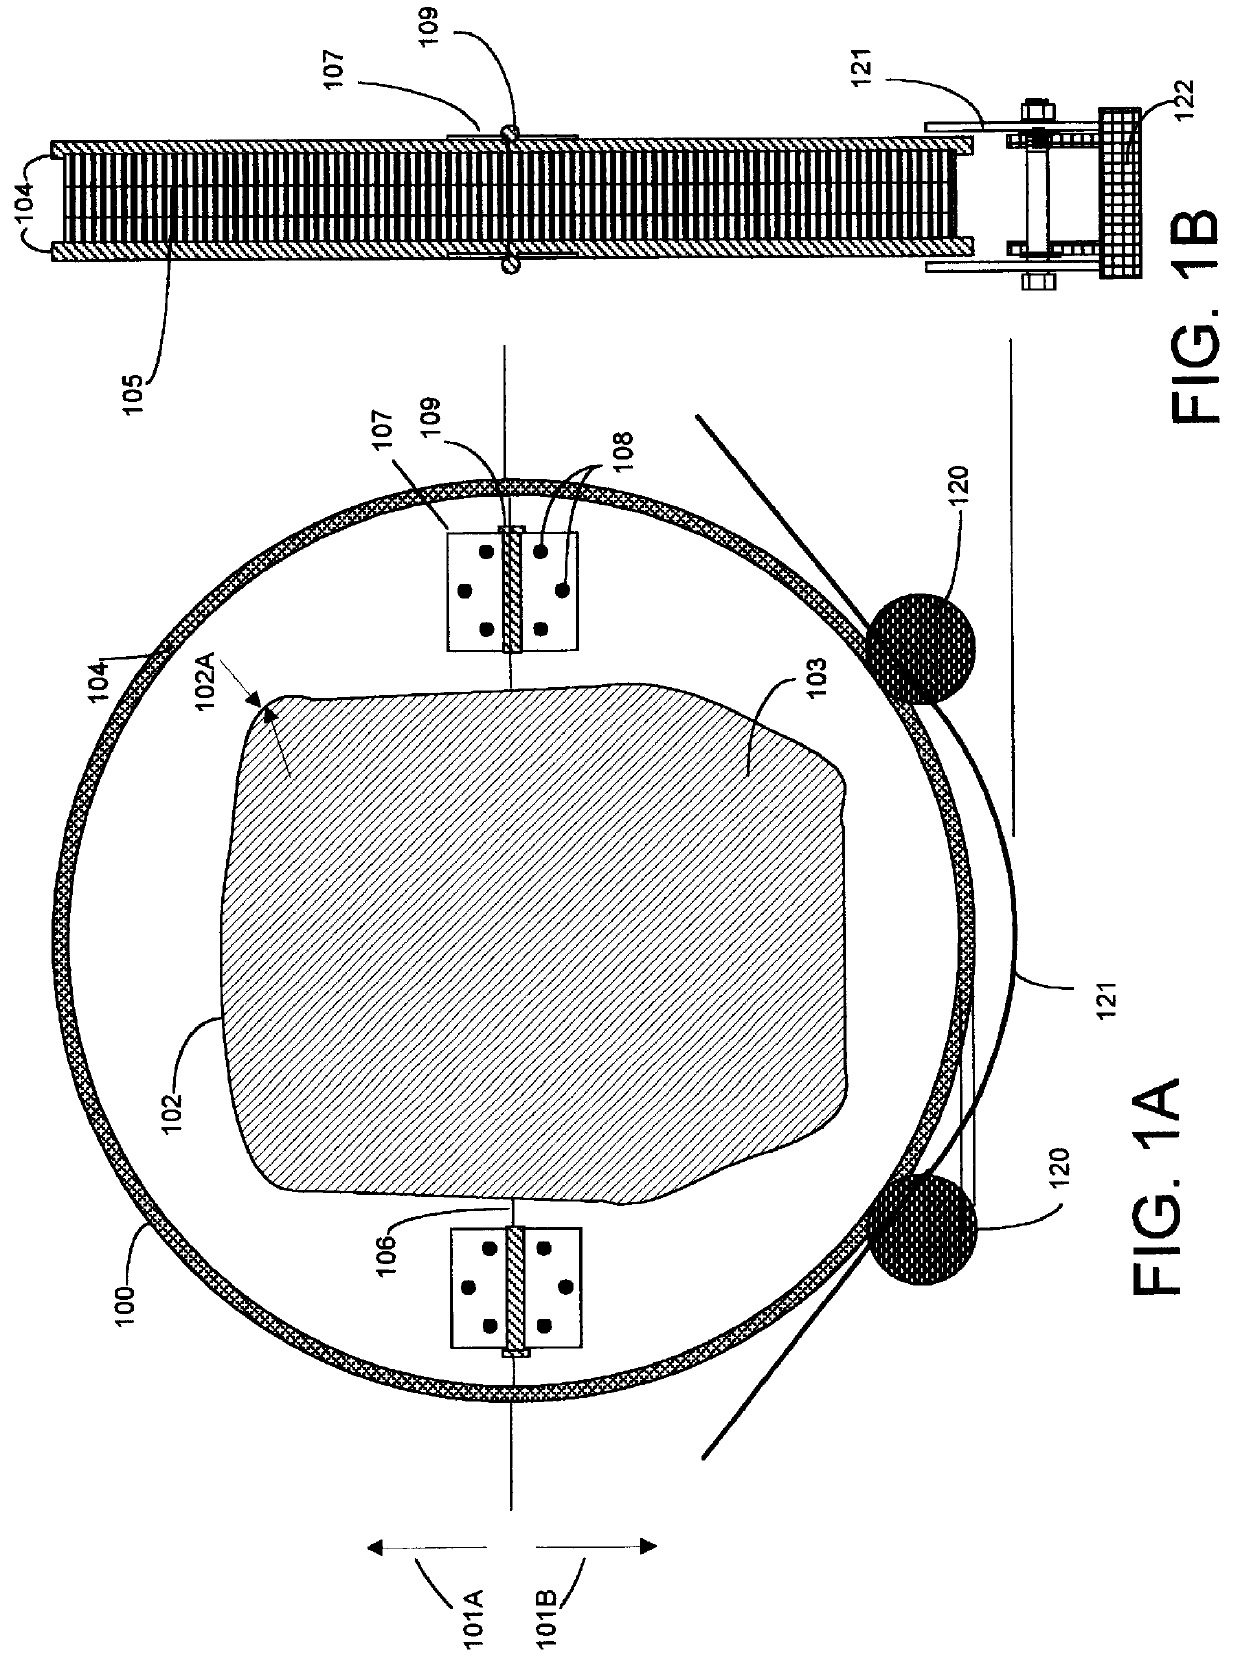 Device, system, and method for securing an irregularly shaped device, including those with discontinuous contours, in a fixture